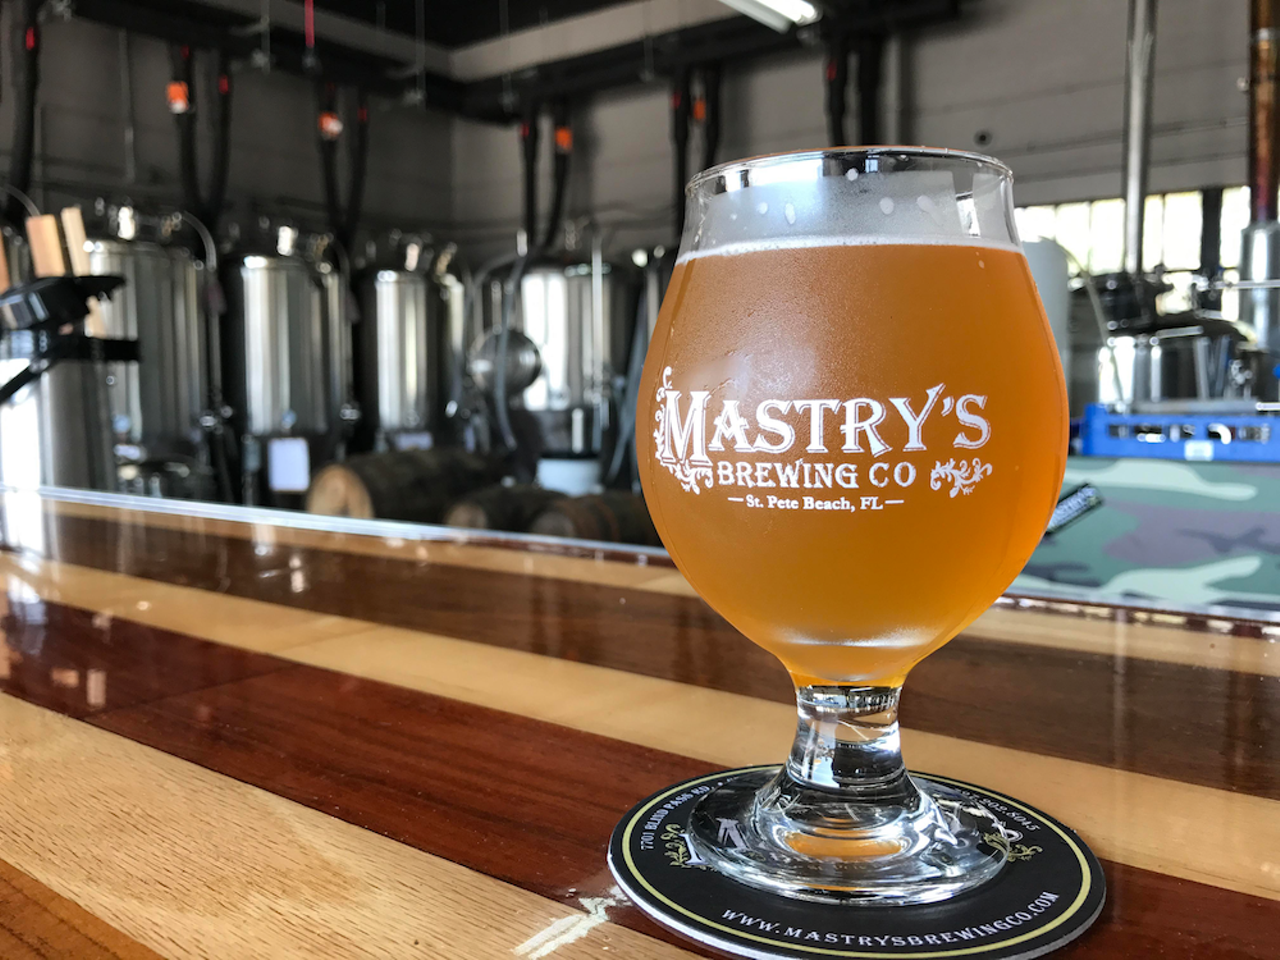 Thursday night trivia at Mastry&#146;s Brewing on St. Pete Beach
Thurs., Jan. 31: 7 p.m.
Photo via Mastry&#146;s Brewing Co.